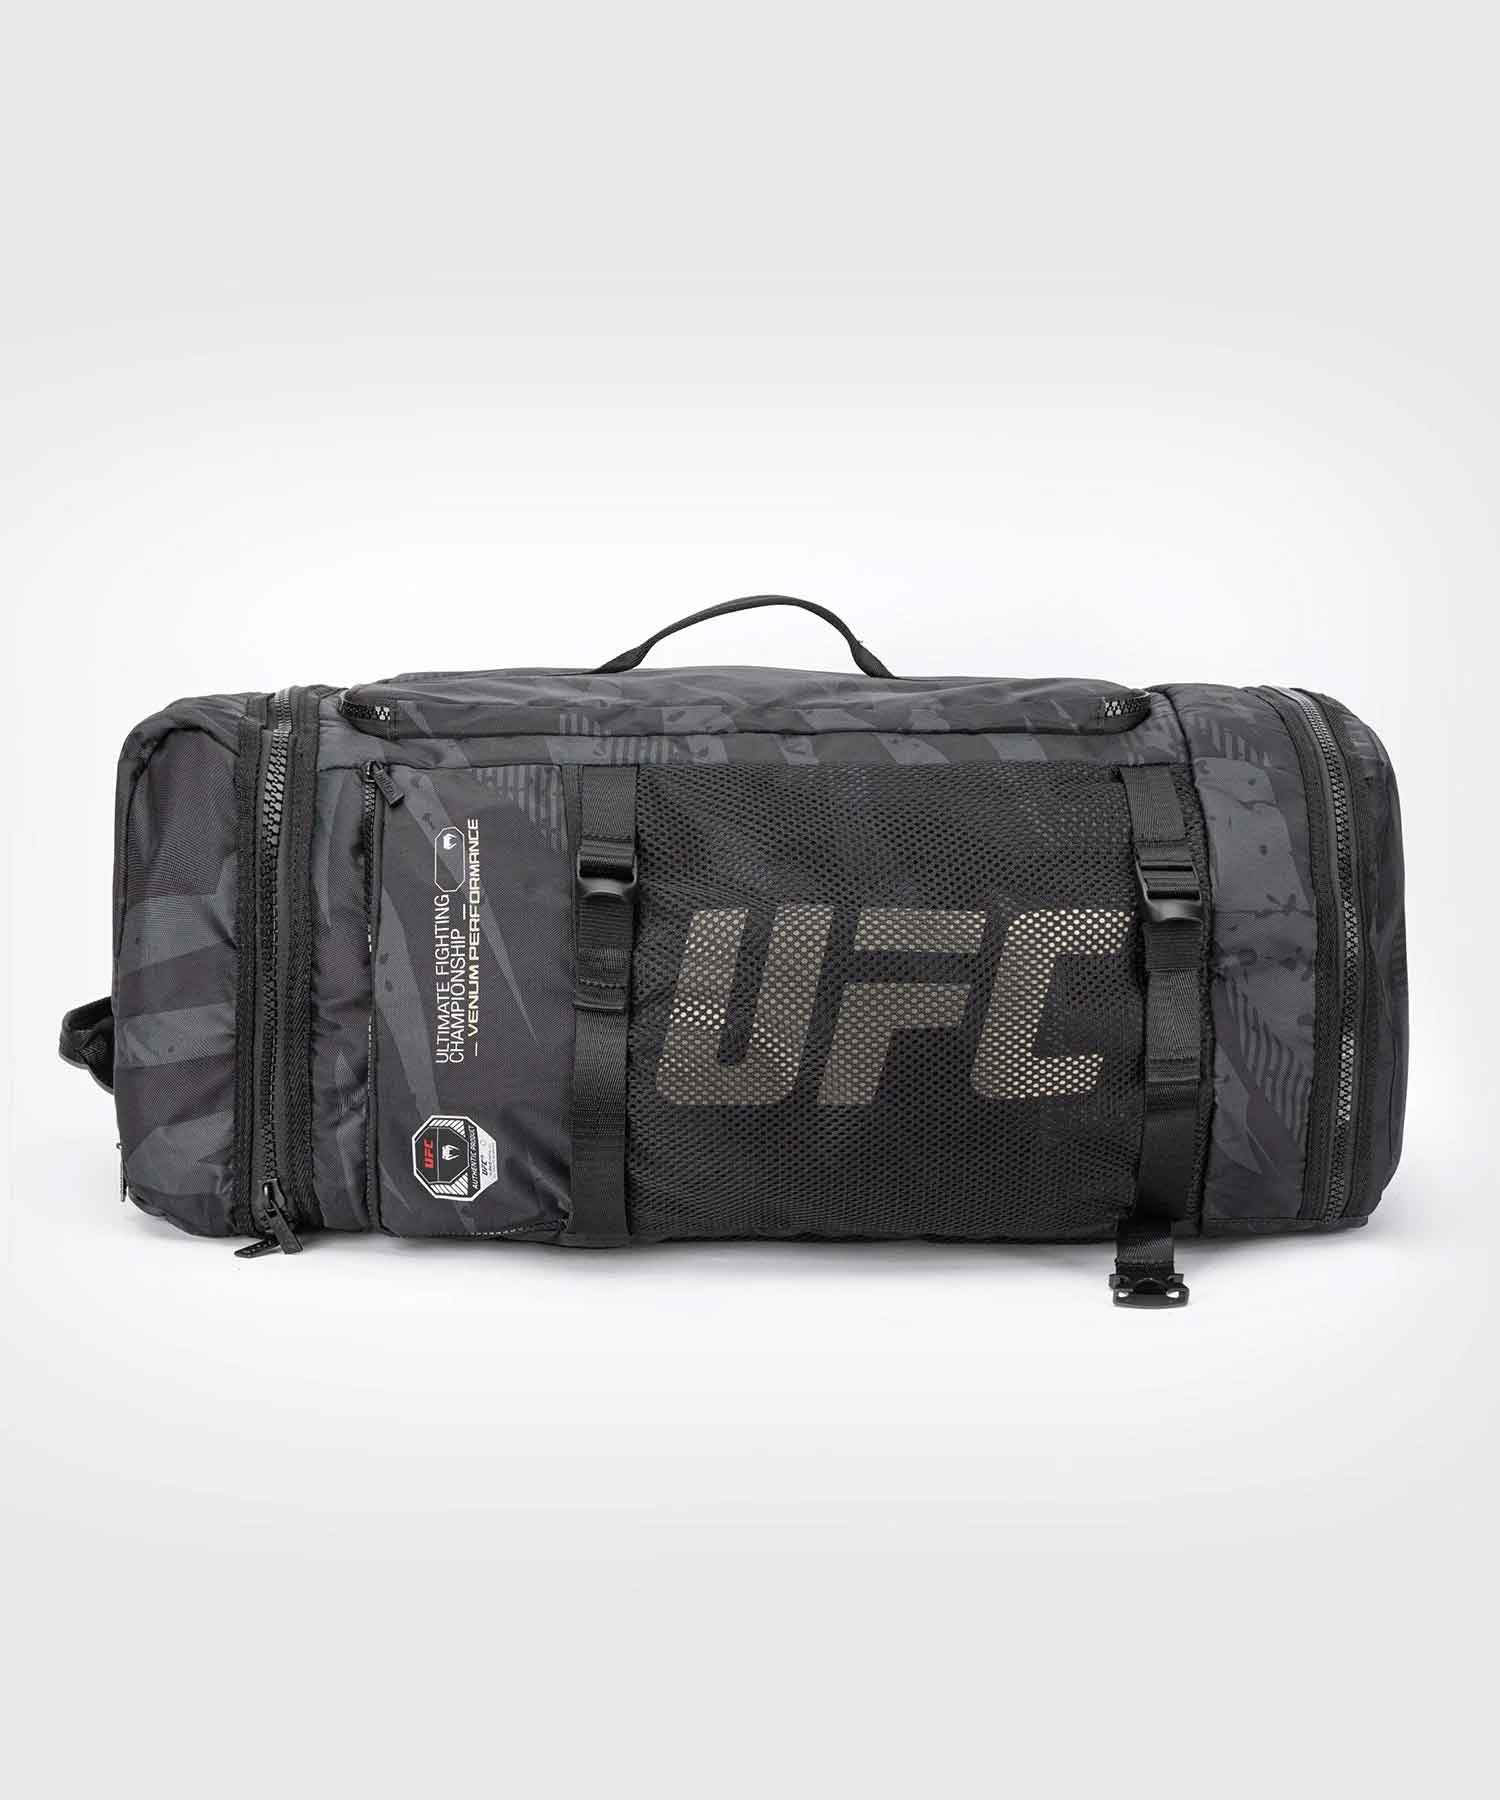 UFC Adrenaline by Venum Fight Week Duffle Bag／UFC アドレナリン by ヴェナム ファイトウィーク ダッフルバッグ（アーバンカモ）